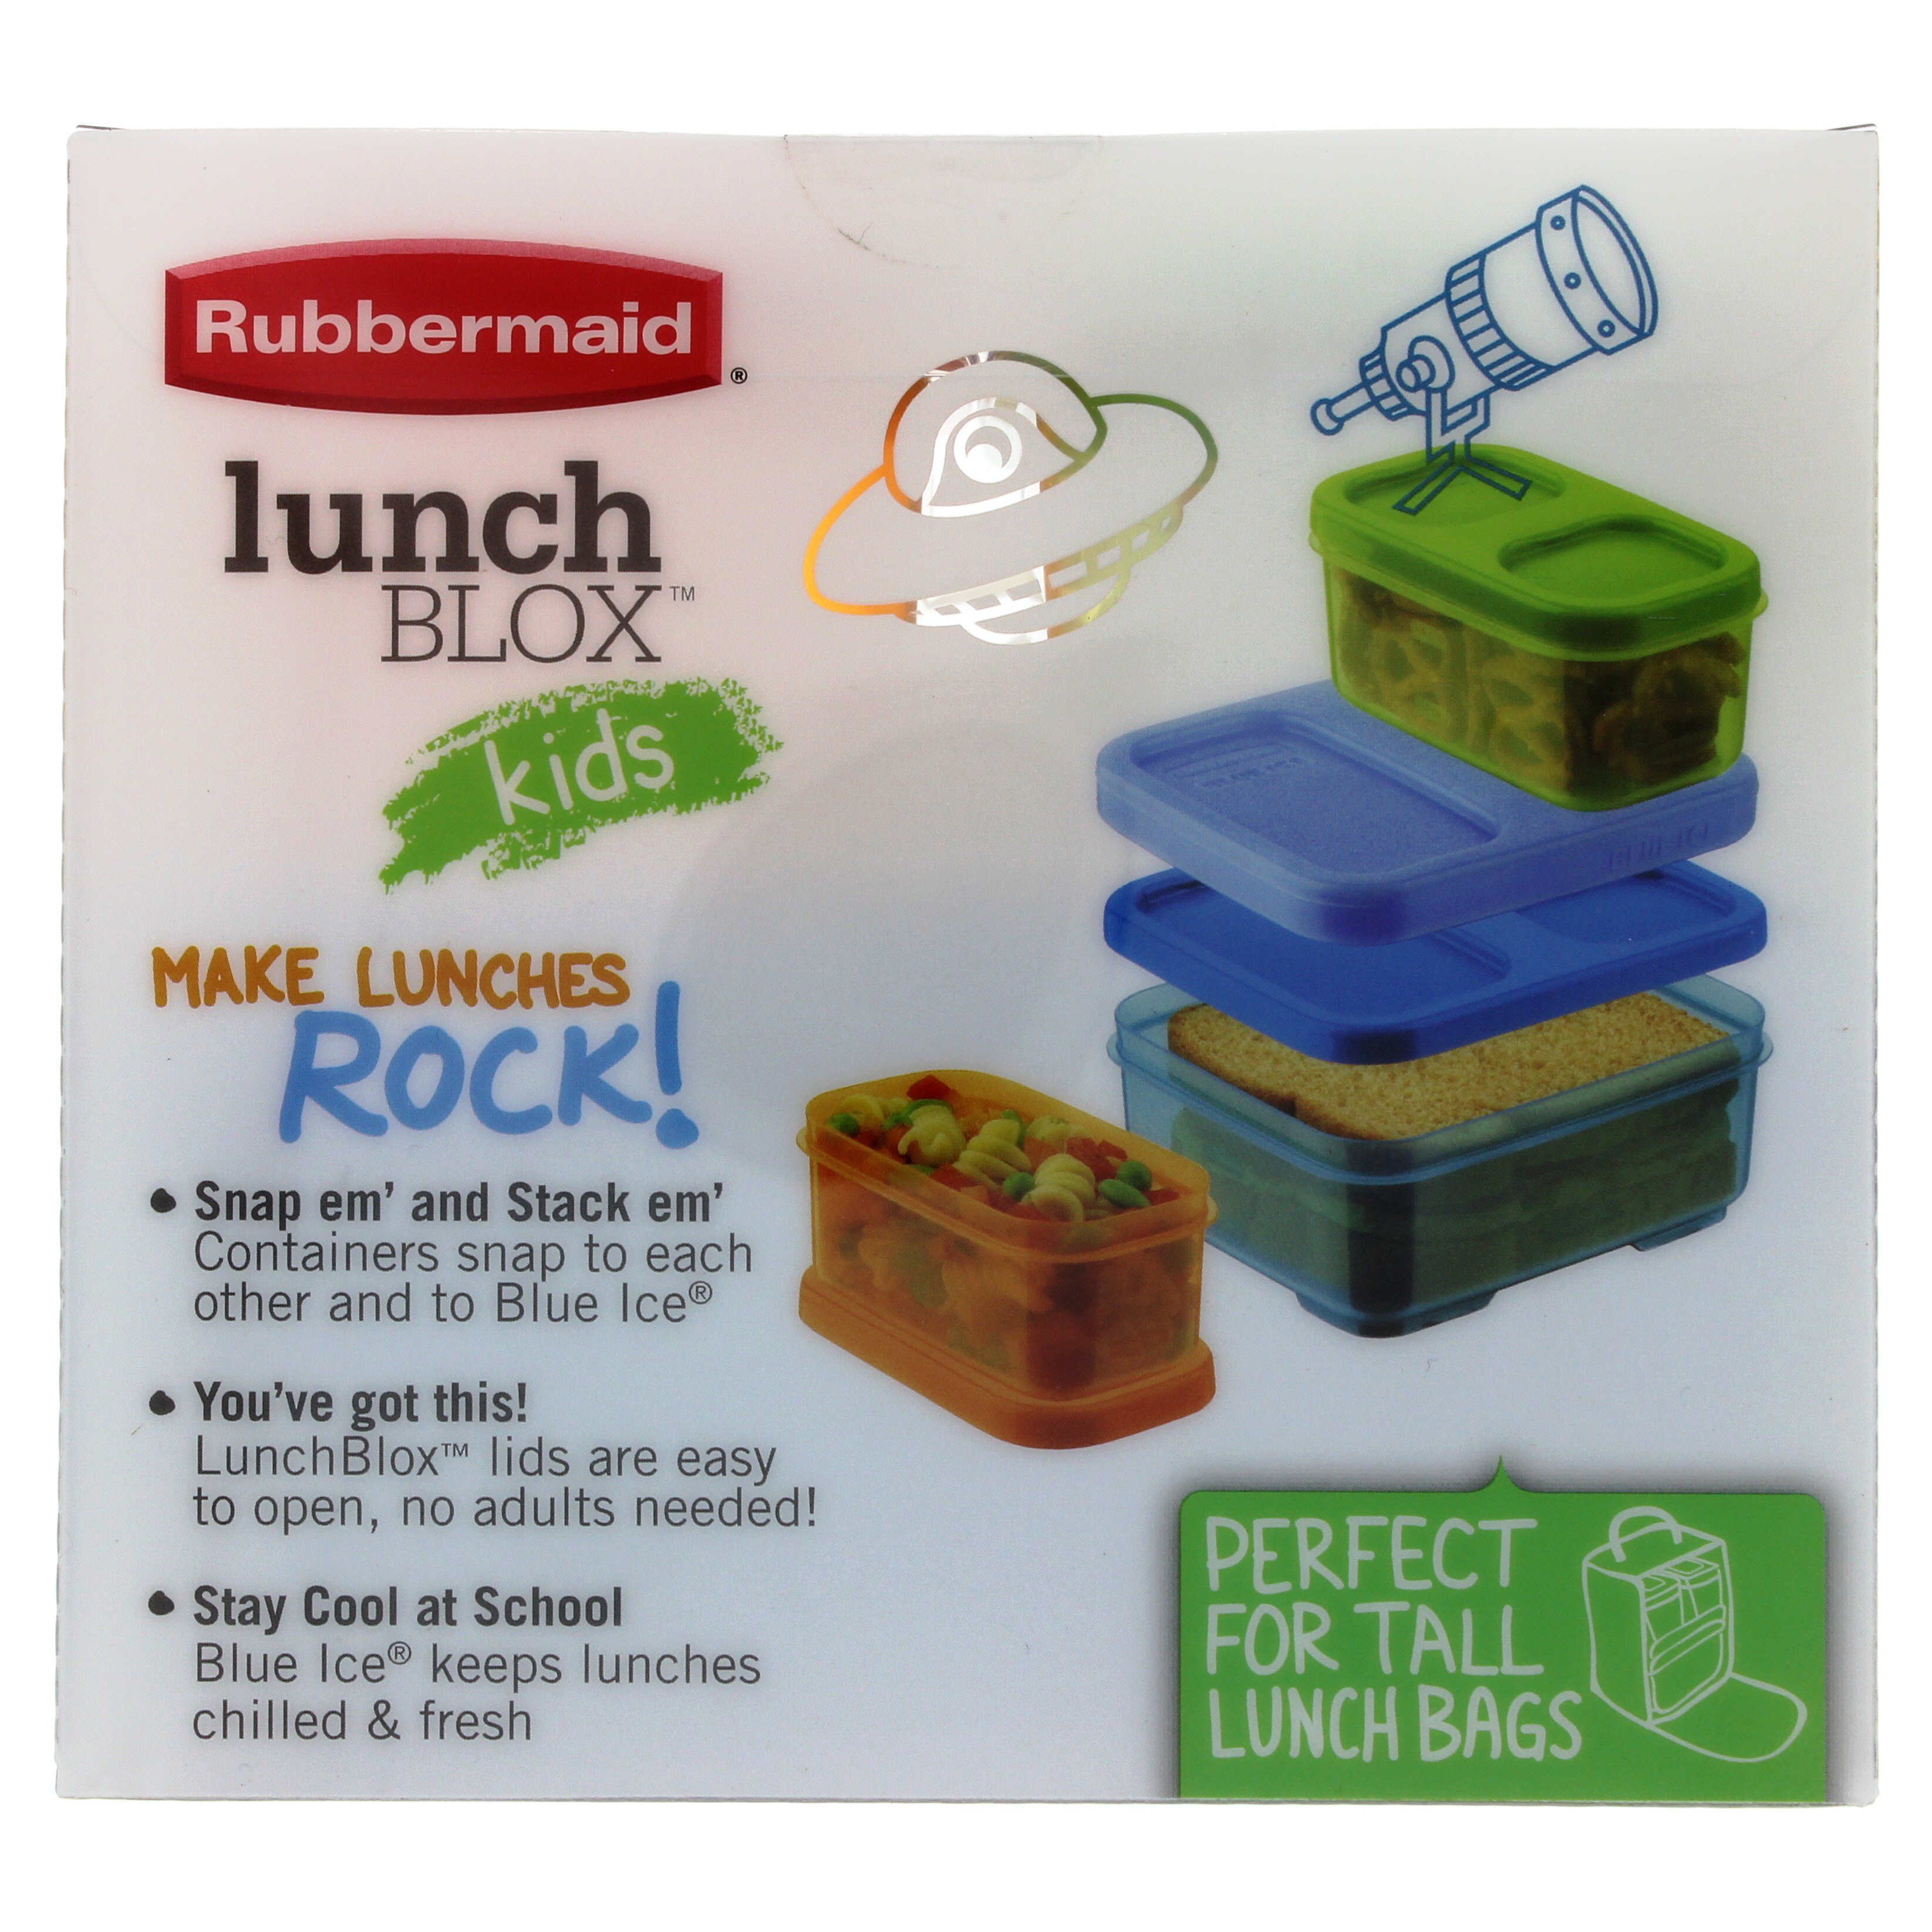 Rubbermaid LunchBlox Kids Lunch Box & Food Prep Containers with Blue Ice